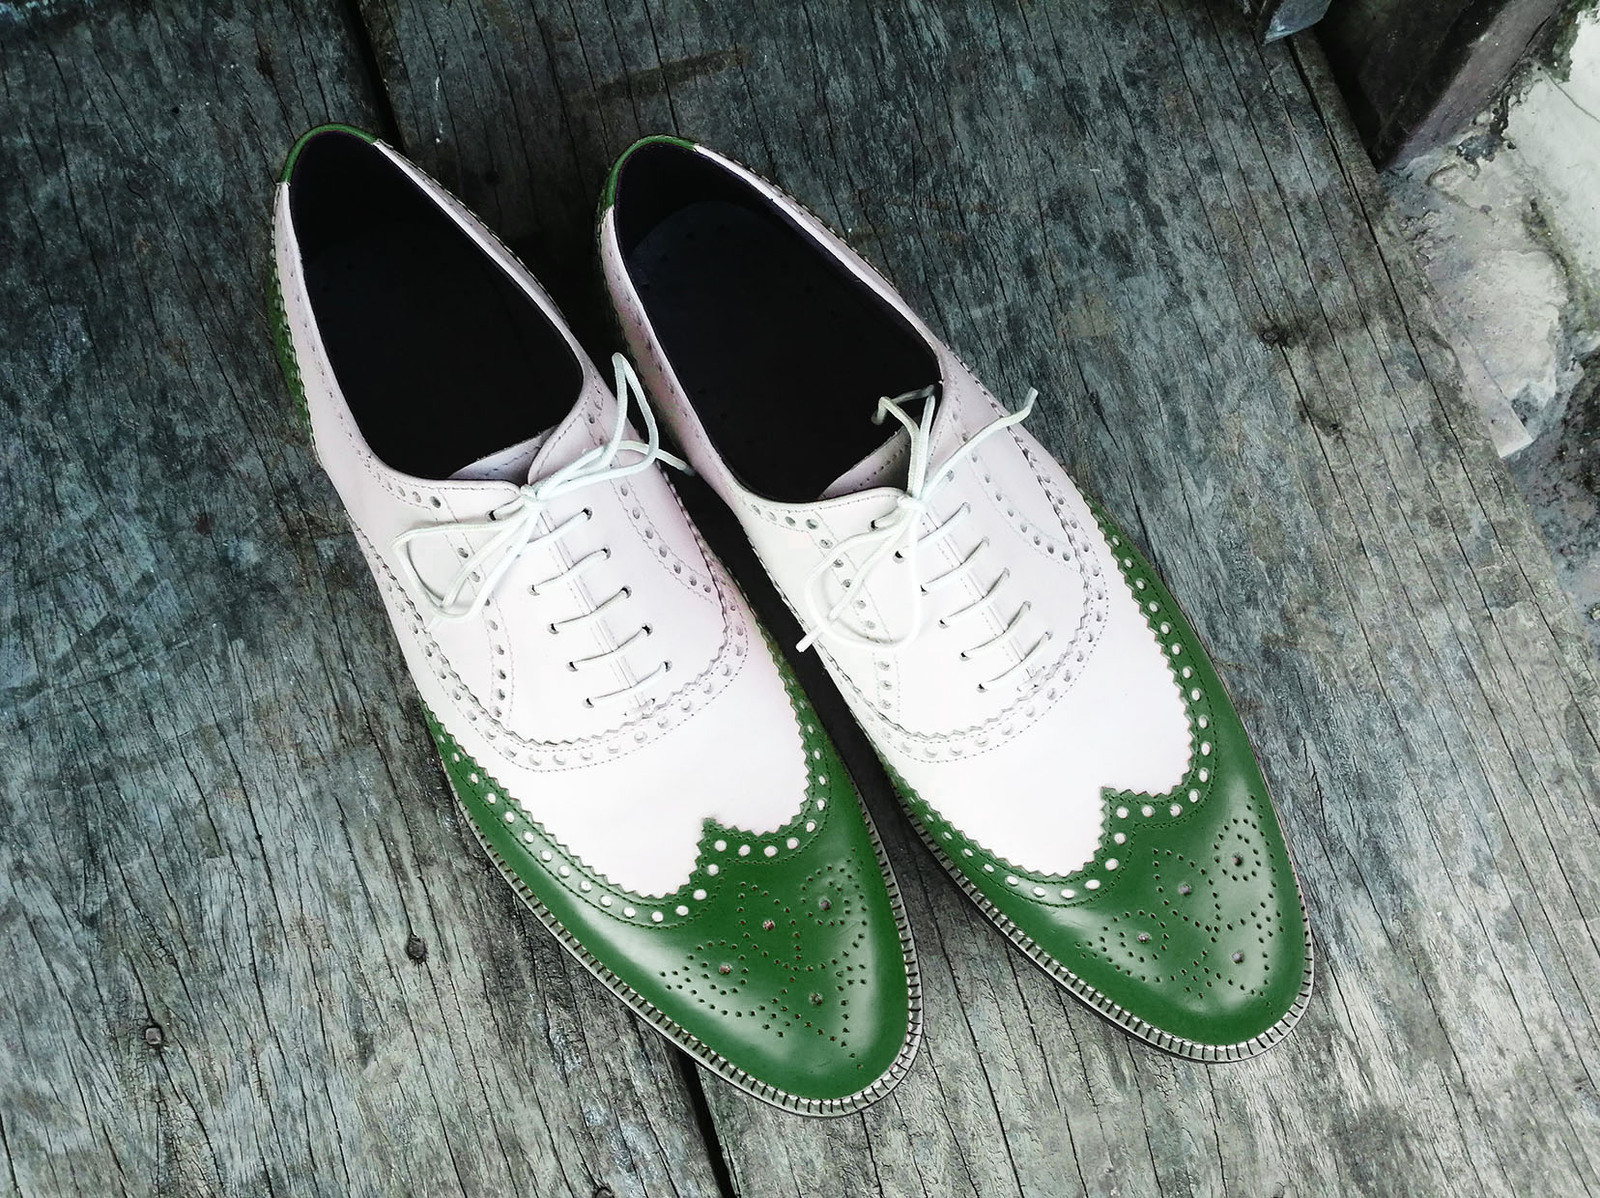 Genuine Two Tone Green White Leather Handcrafted Oxford Lace Up Men Shoes